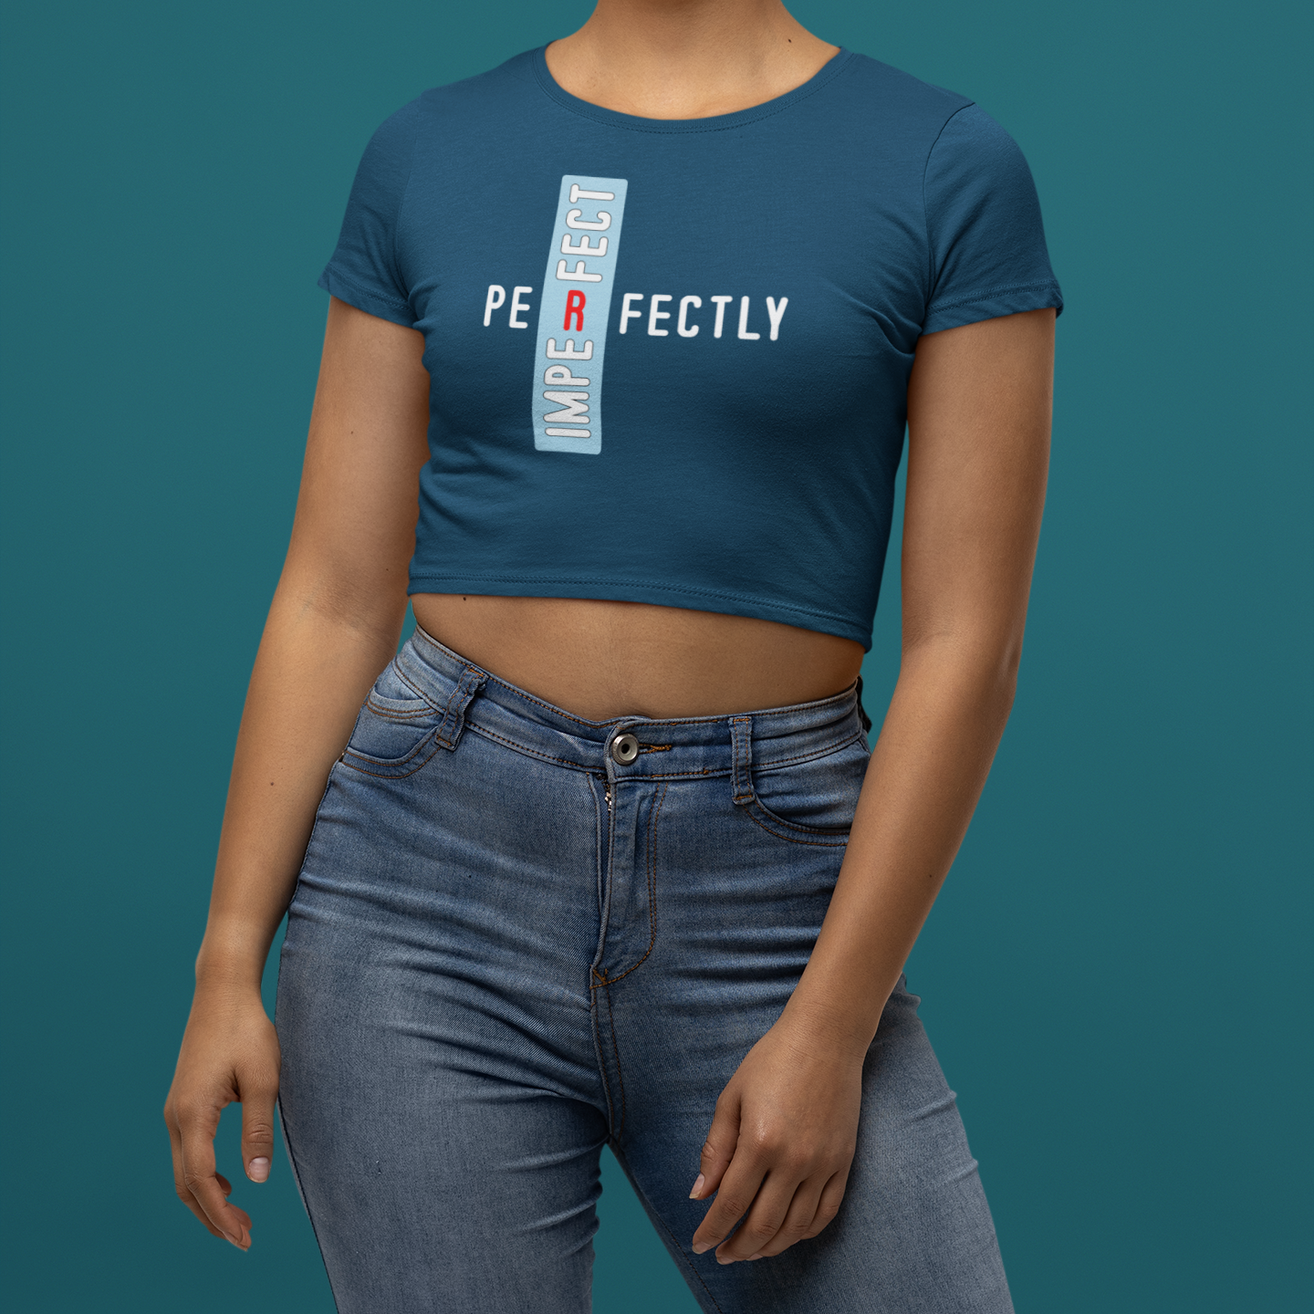 Perfectly Imperfect Women's Empowerment Cotton Crop top